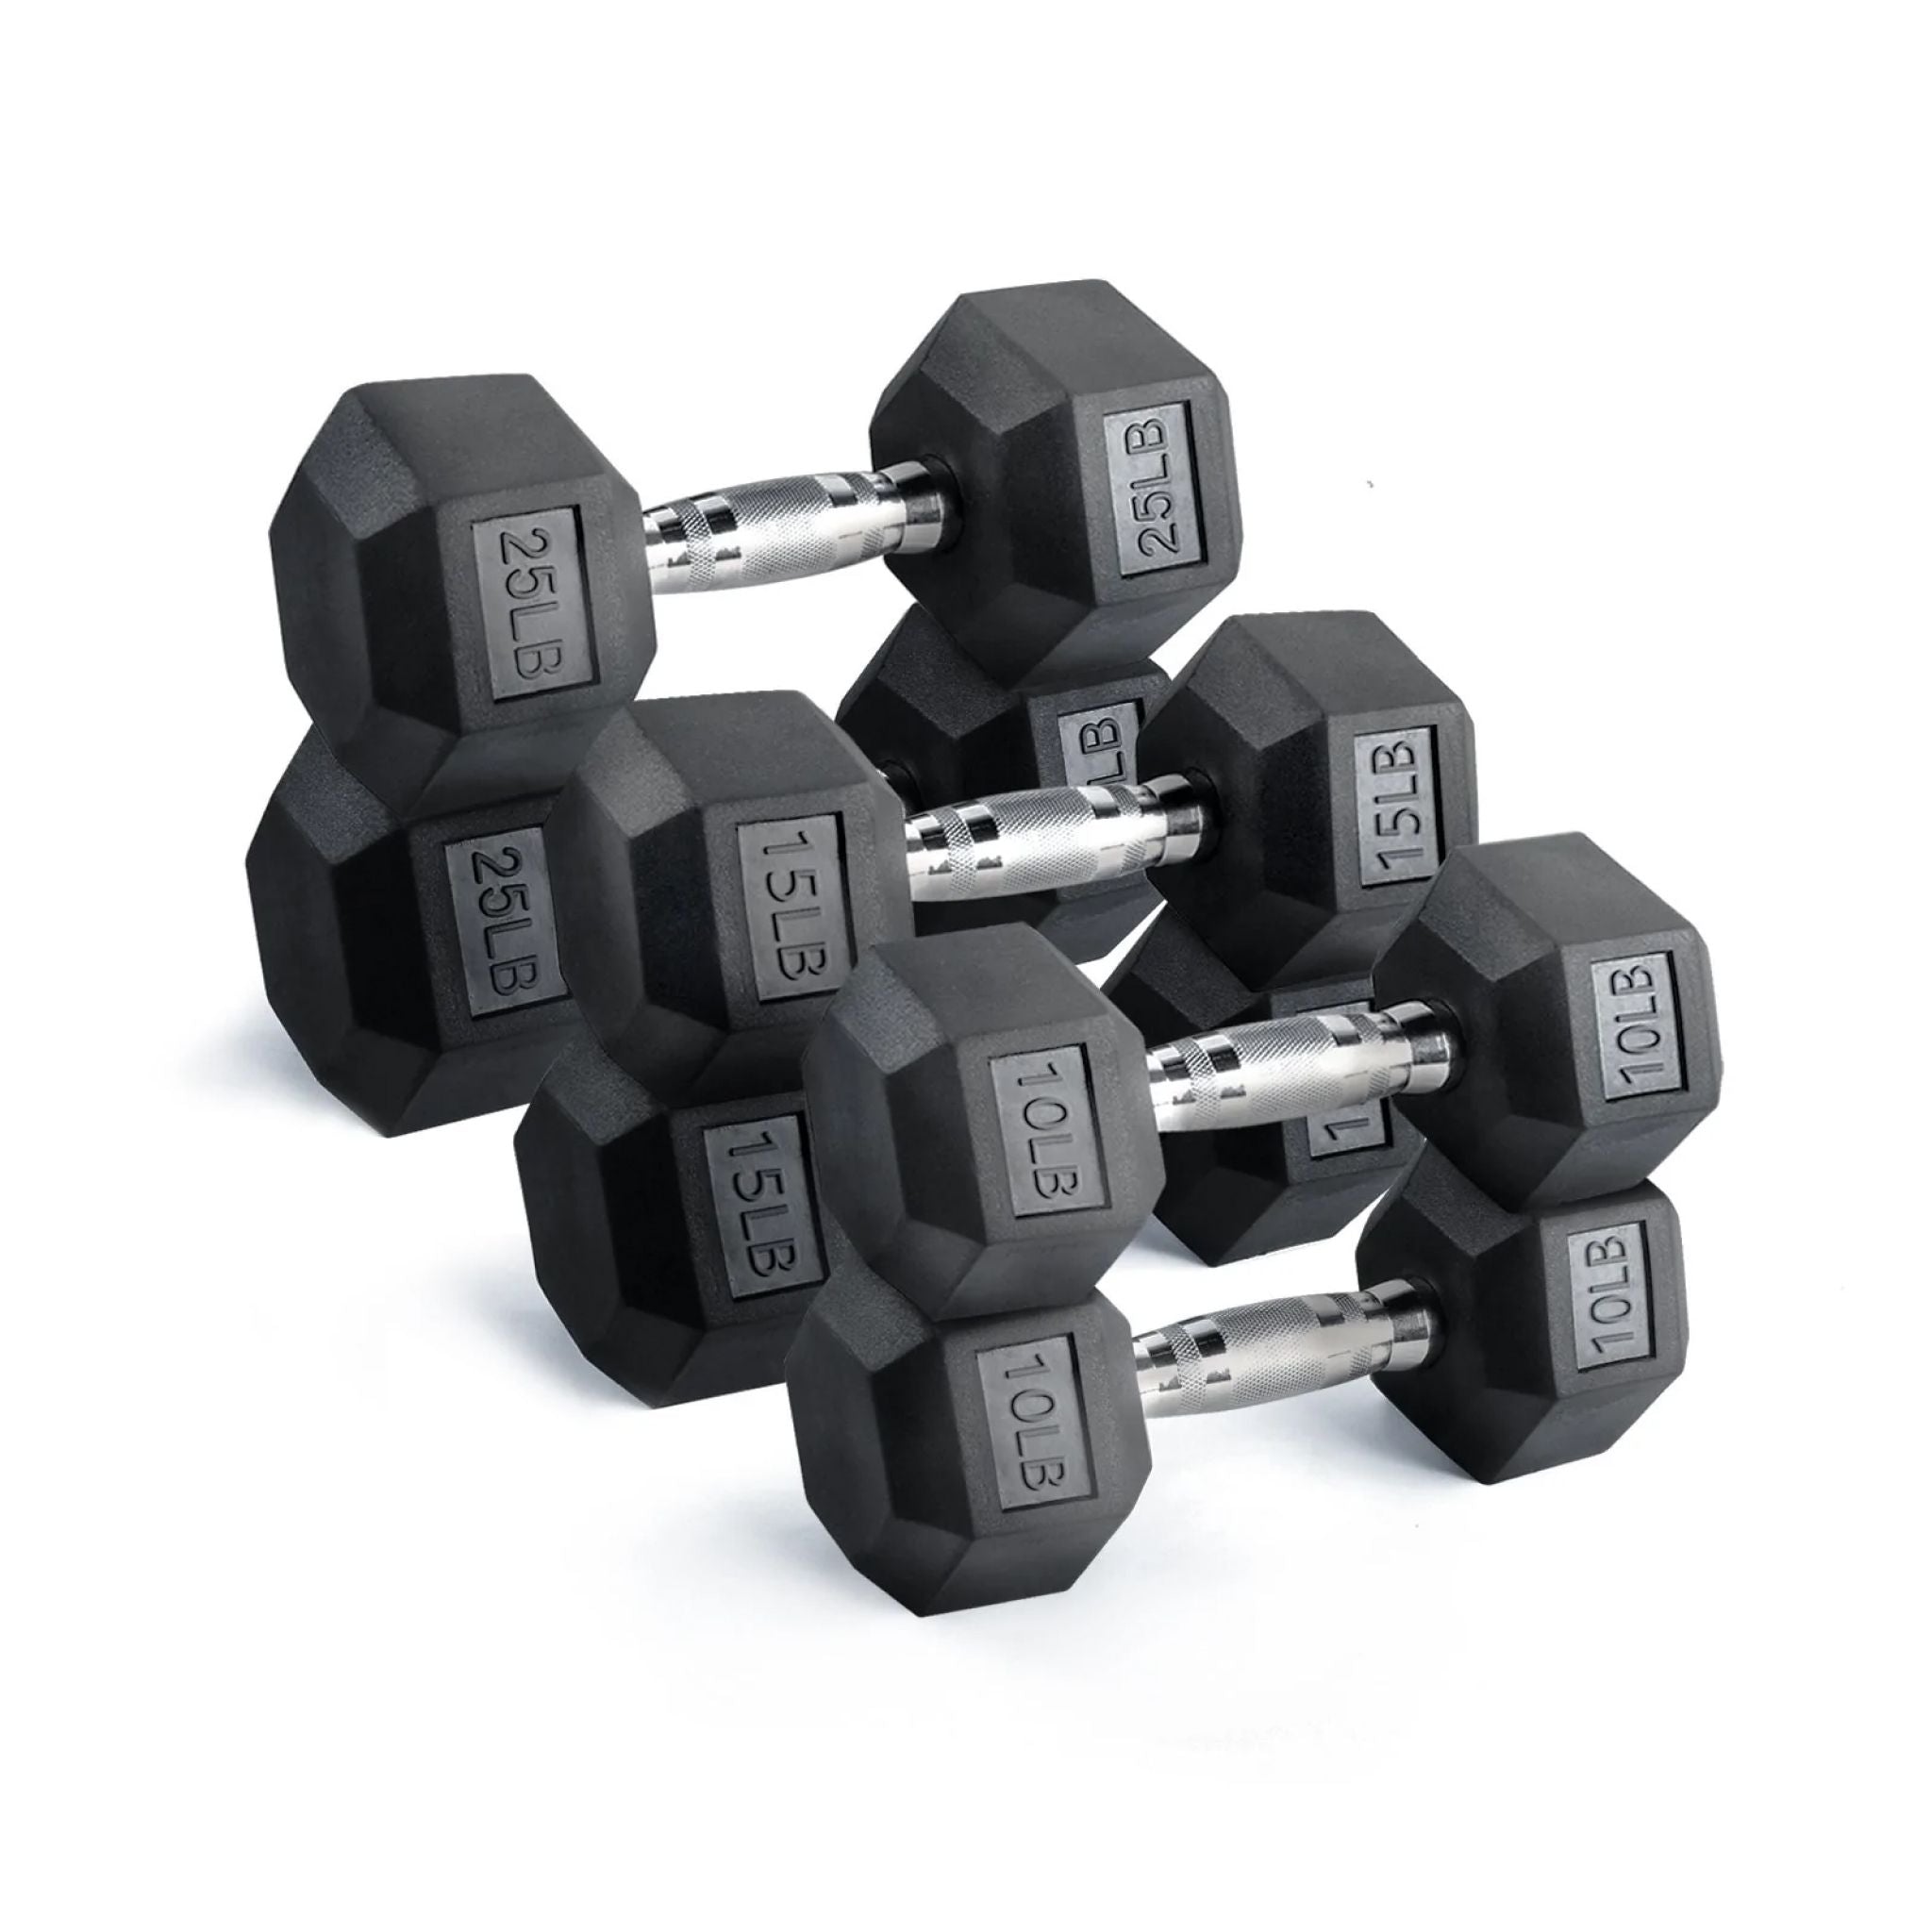 Stacked pairs of rubber hex dumbbells at Express Gym Supply